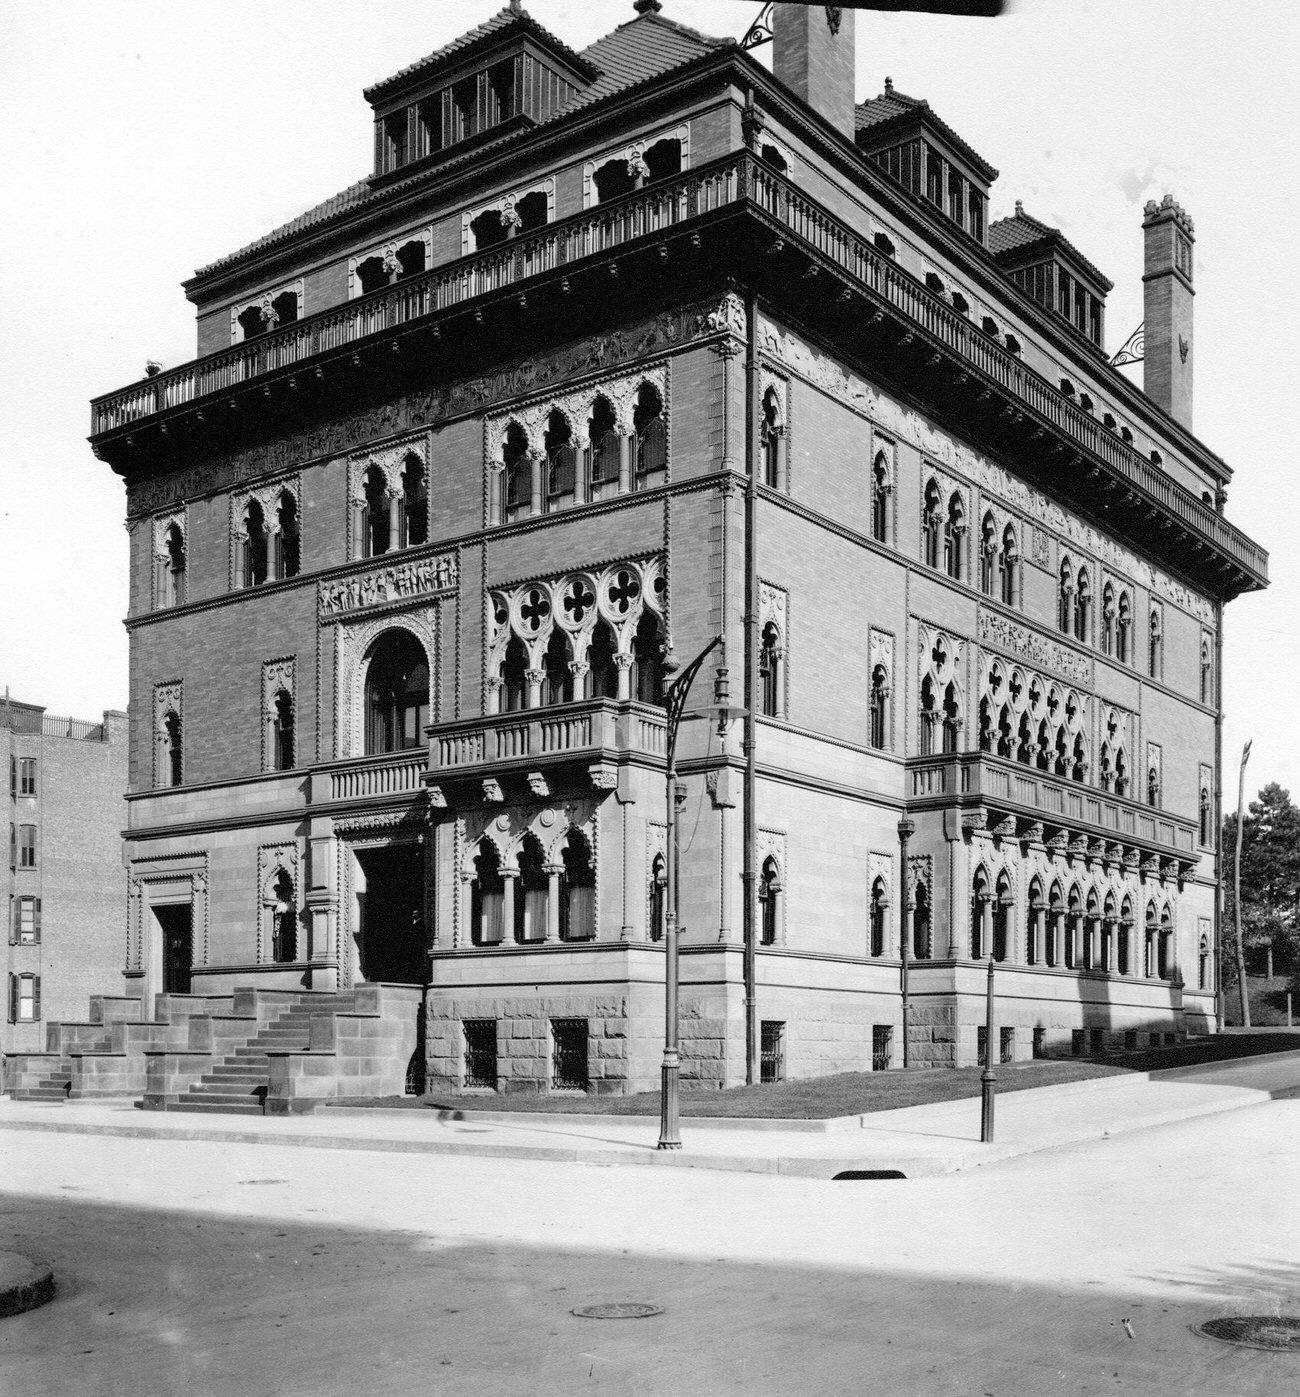 Montauk Club At Lincoln Place And Eighth Avenue, Brooklyn, 1895